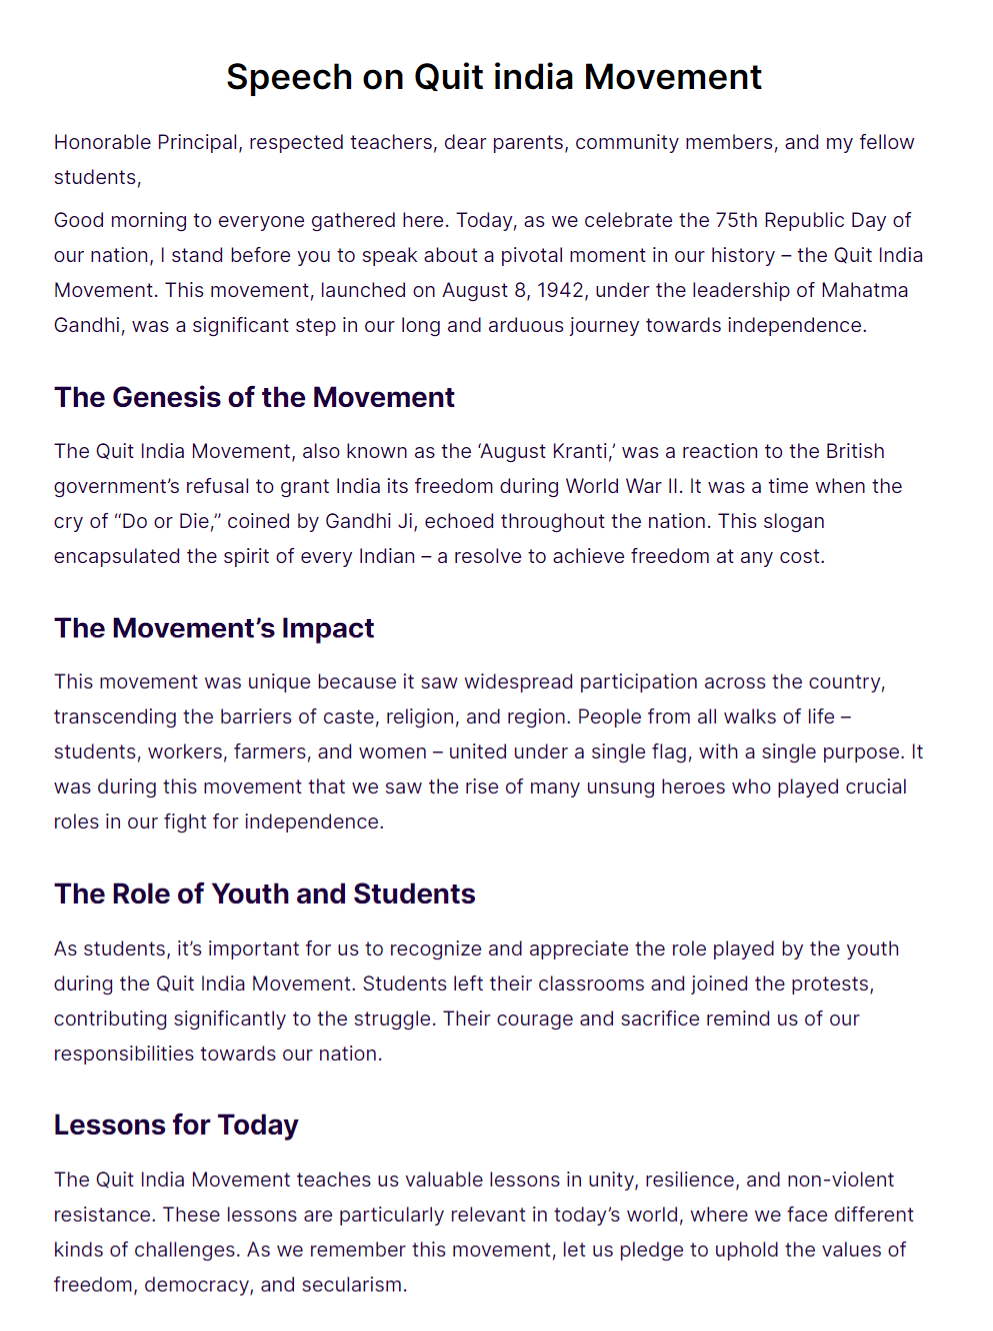 speech on quit india movement examples edit download